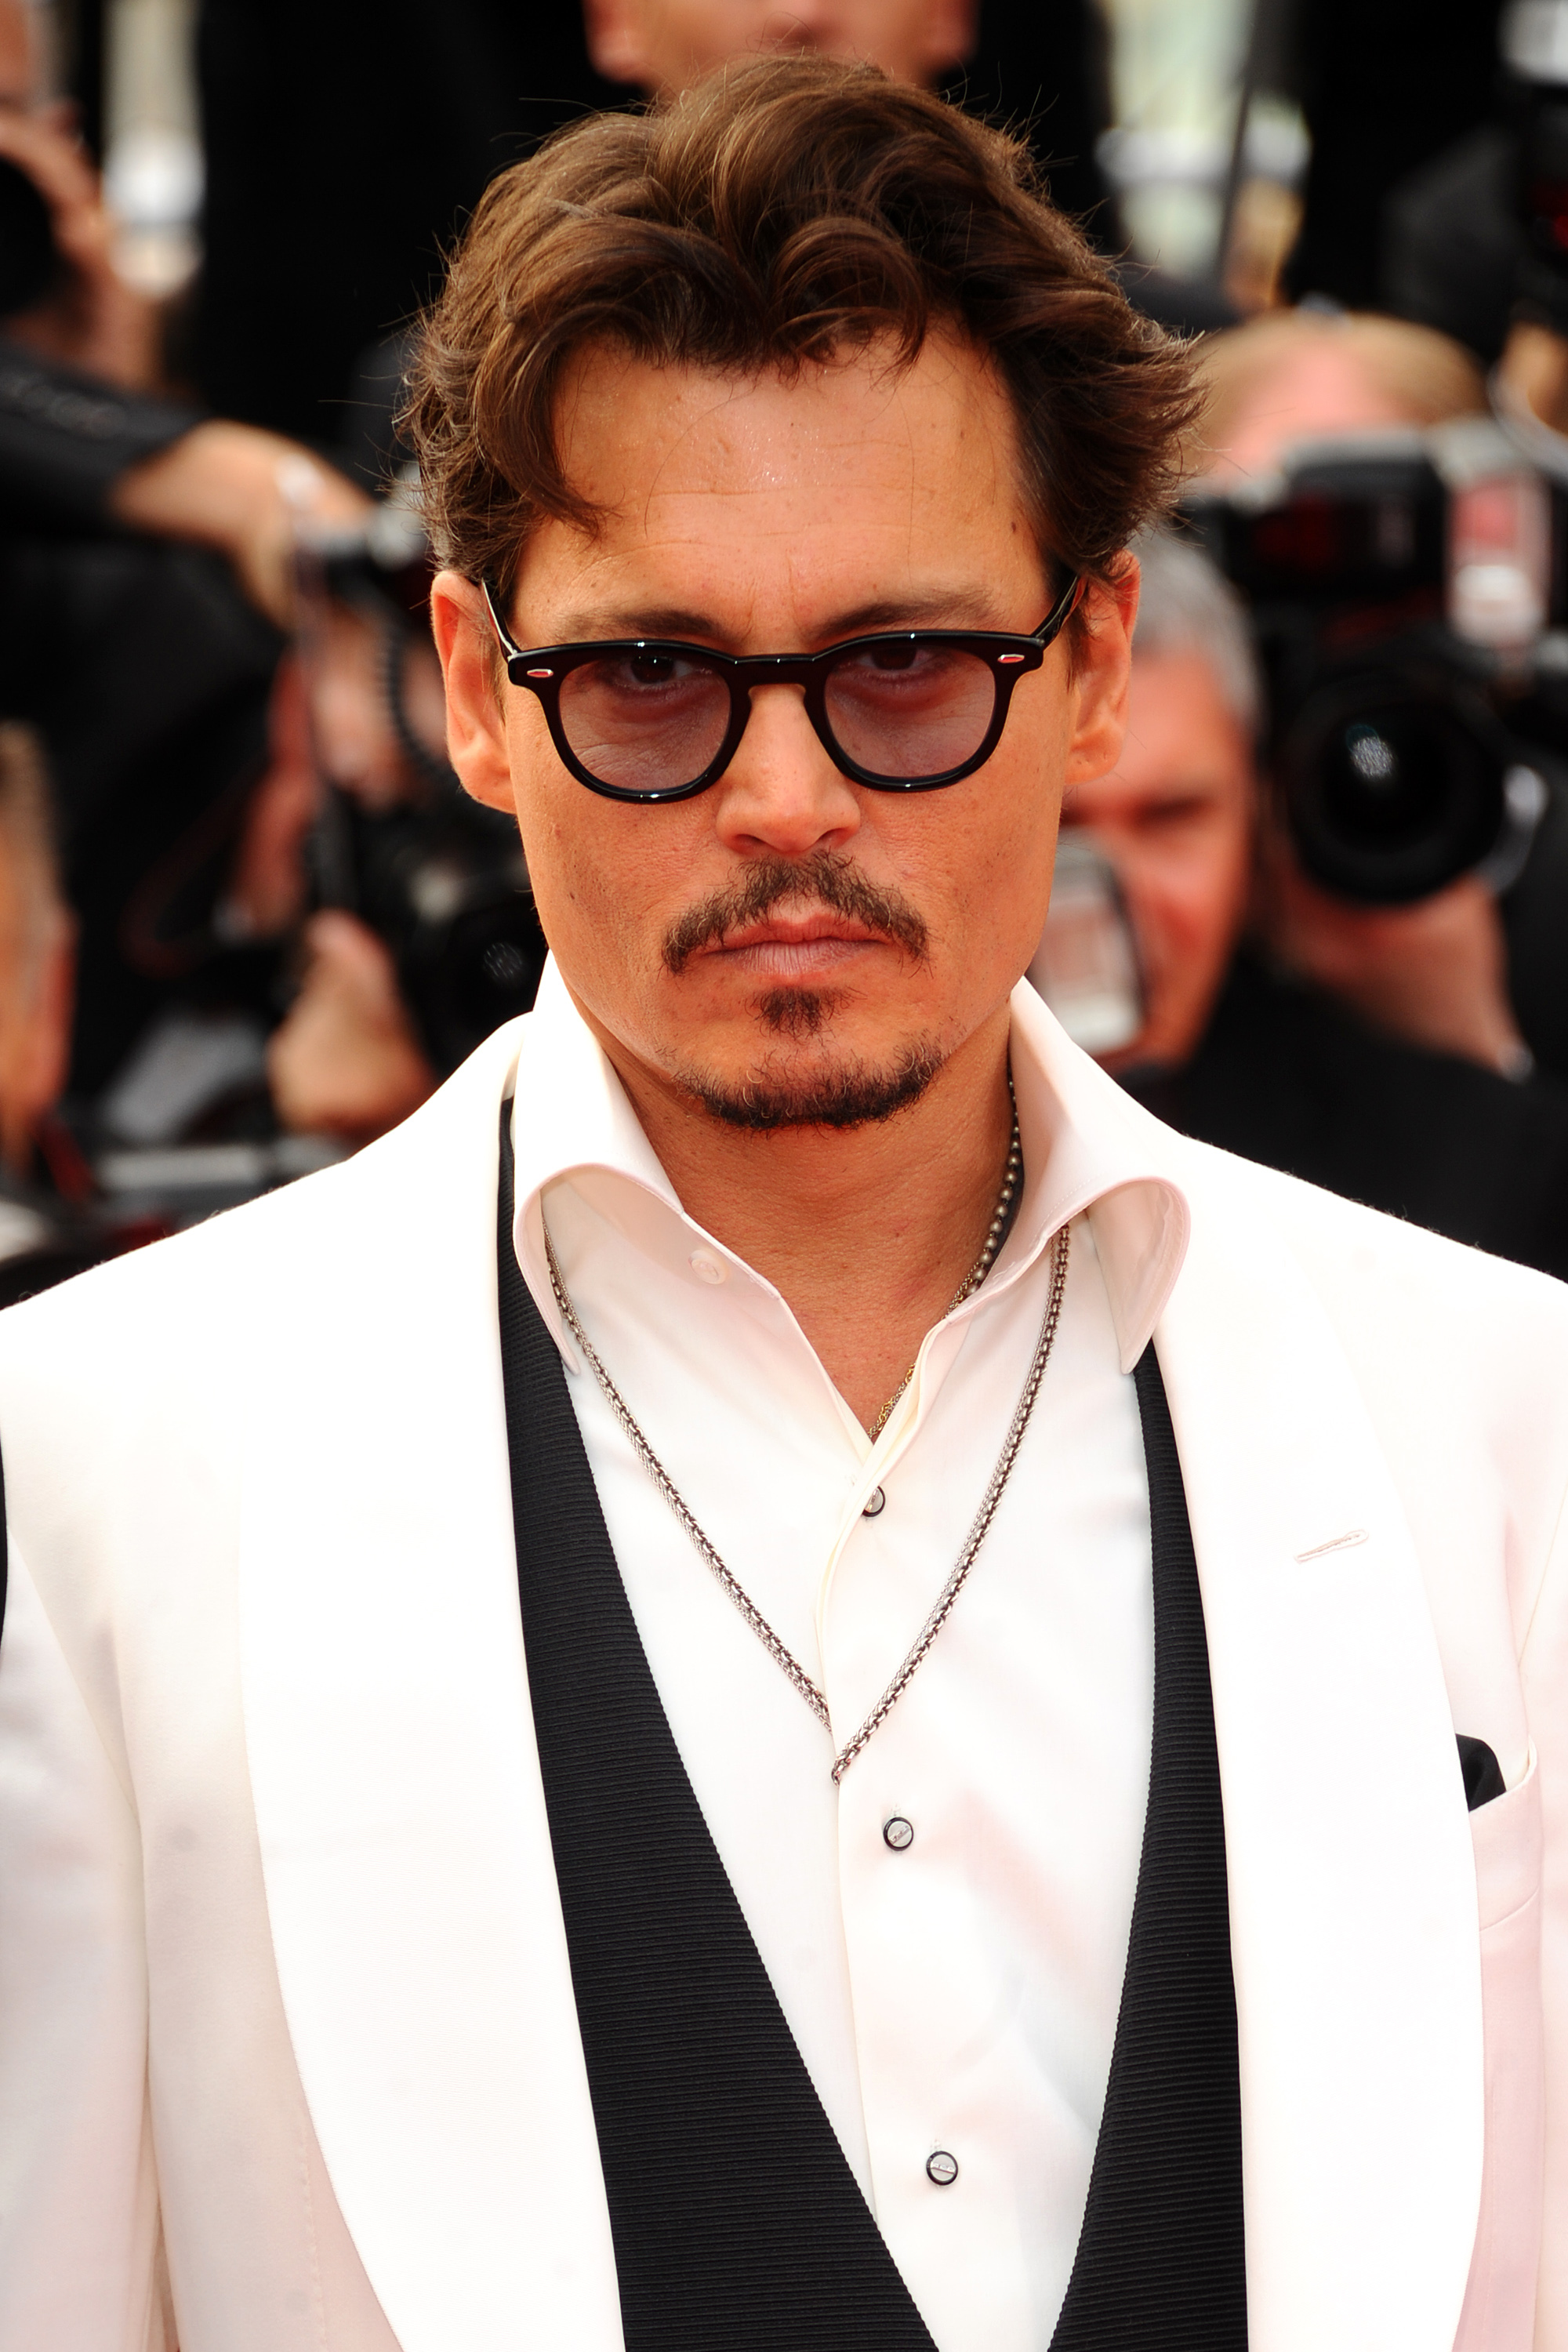 Johnny Depp at 'Pirates of the Caribbean: On Stranger Tides' premiere, 64th Cannes Film Festival, Palais des Festivals in Cannes, France on May 14, 2011 | Source: Getty Images